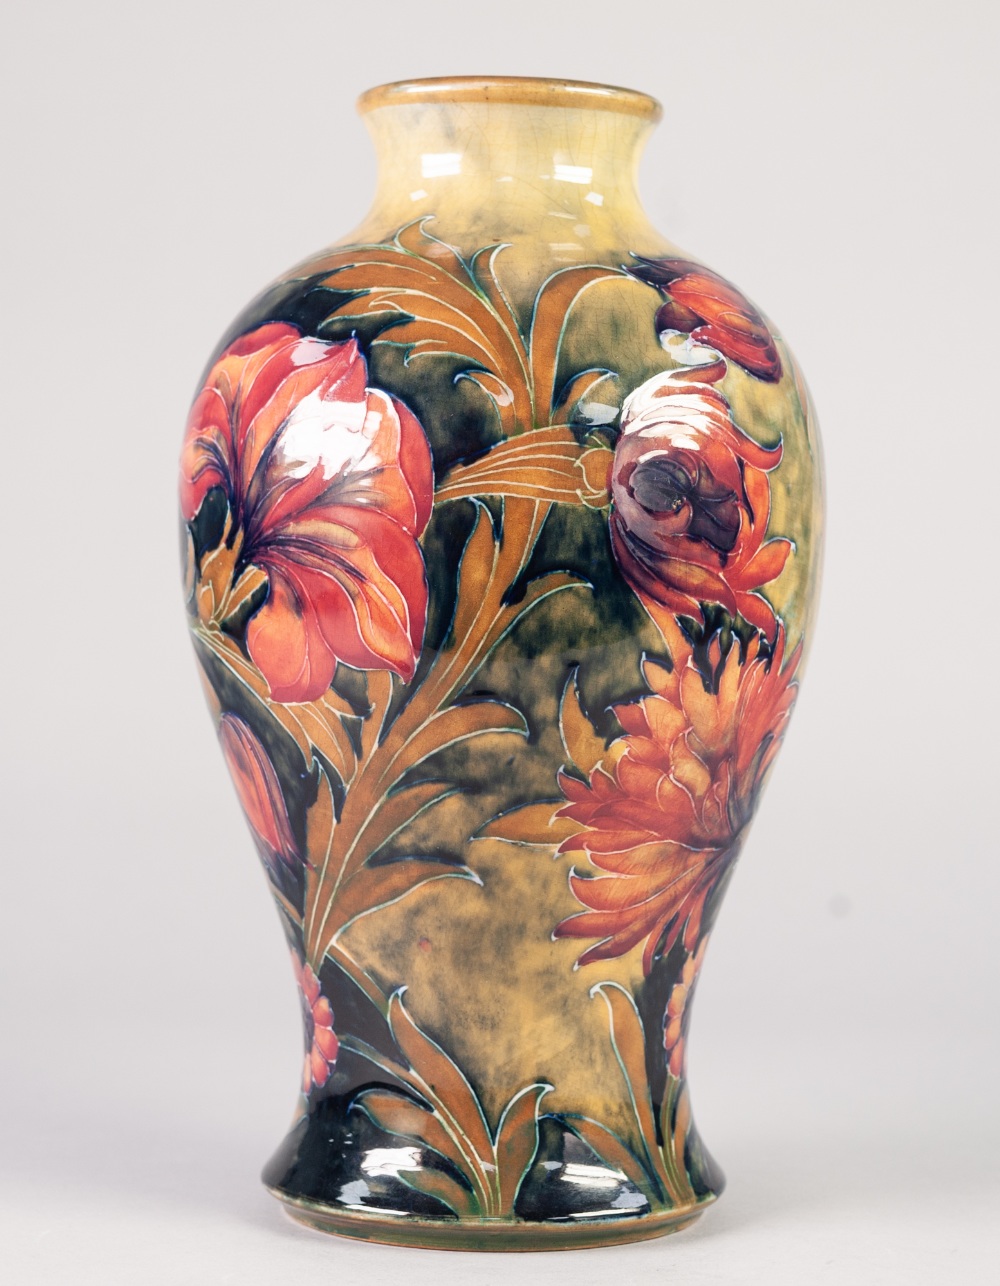 A GOOD INTER-WAR YEARS WILLIAM MOORCROFT POTTERY INVERTED BALUSTER SHAPE VASE, tube-lined with brick - Image 3 of 5